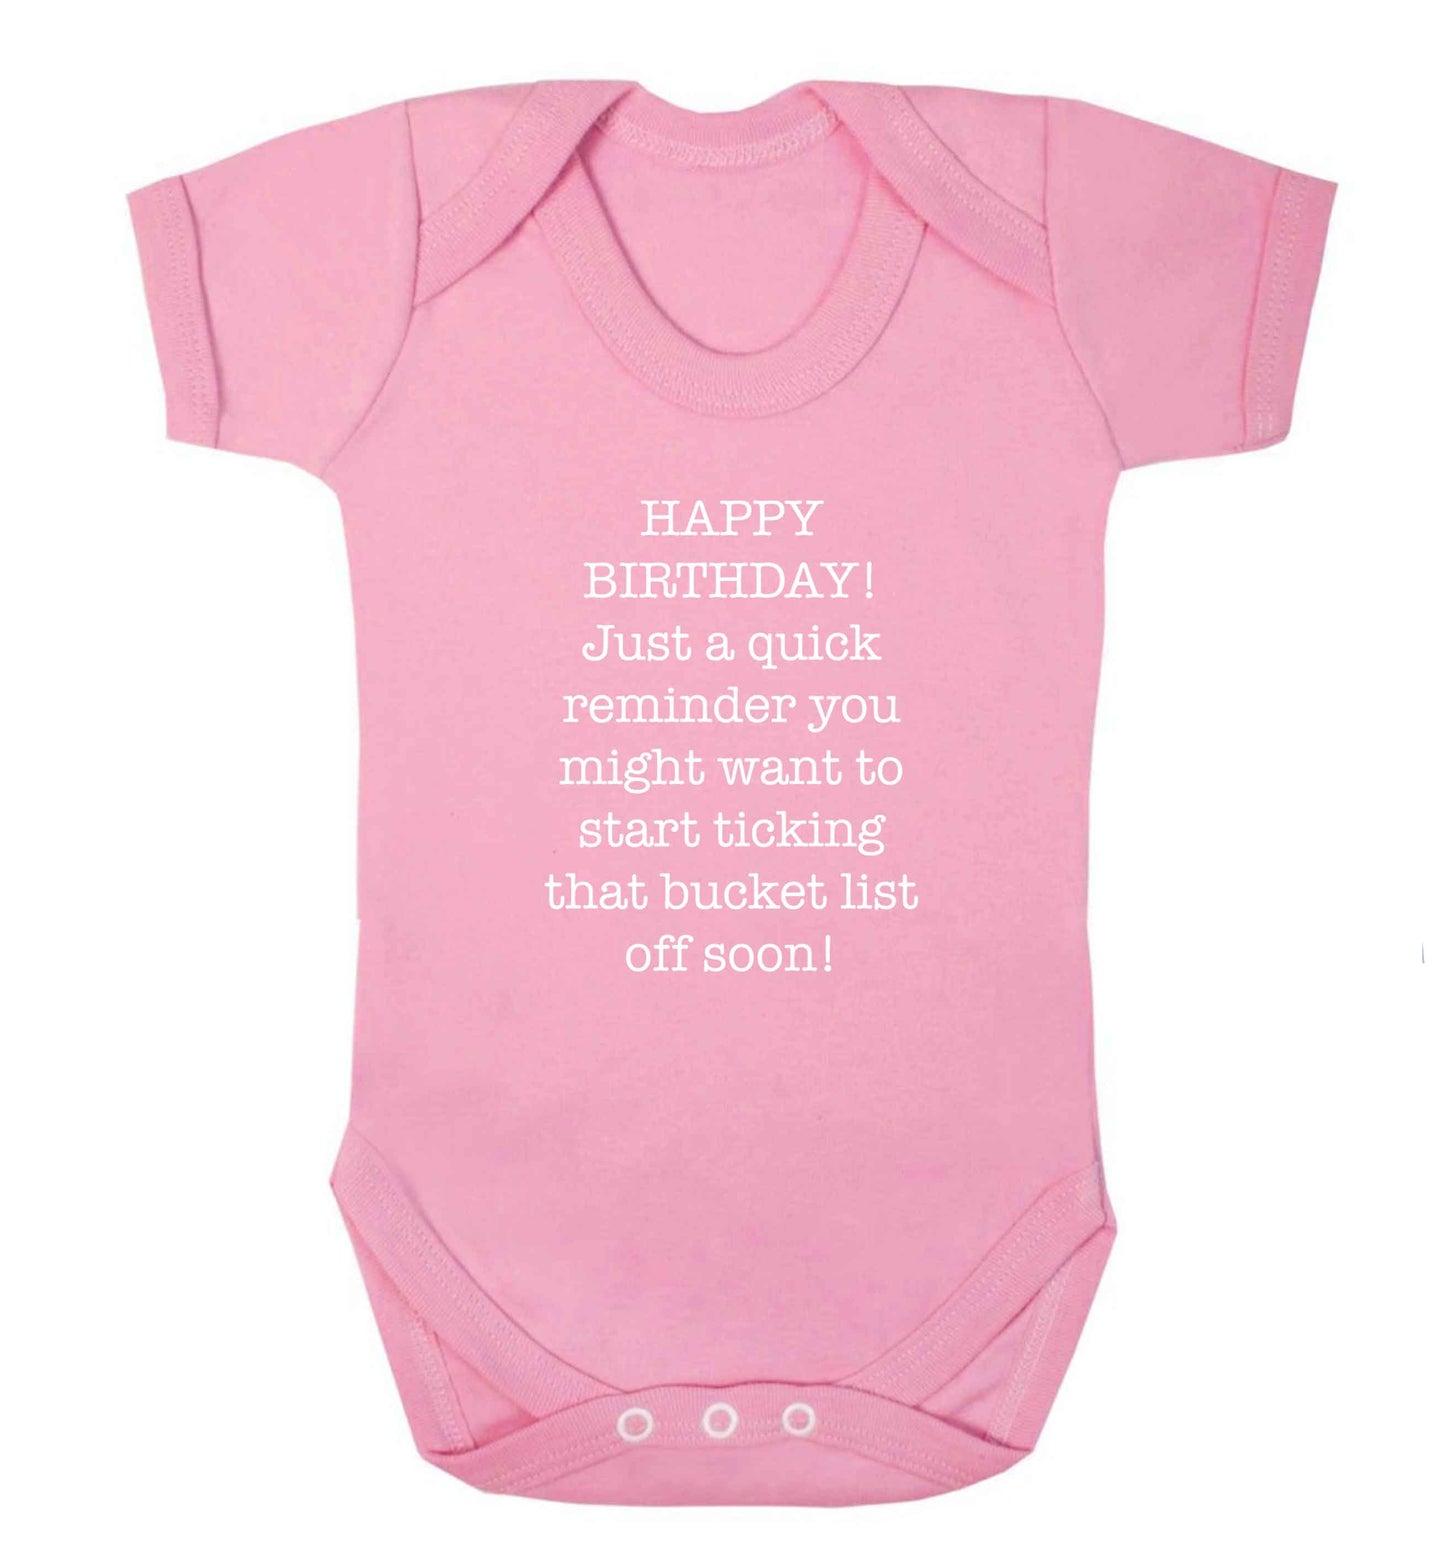 Happy birthday, just a quick reminder you might want to start ticking that bucket list off soon baby vest pale pink 18-24 months